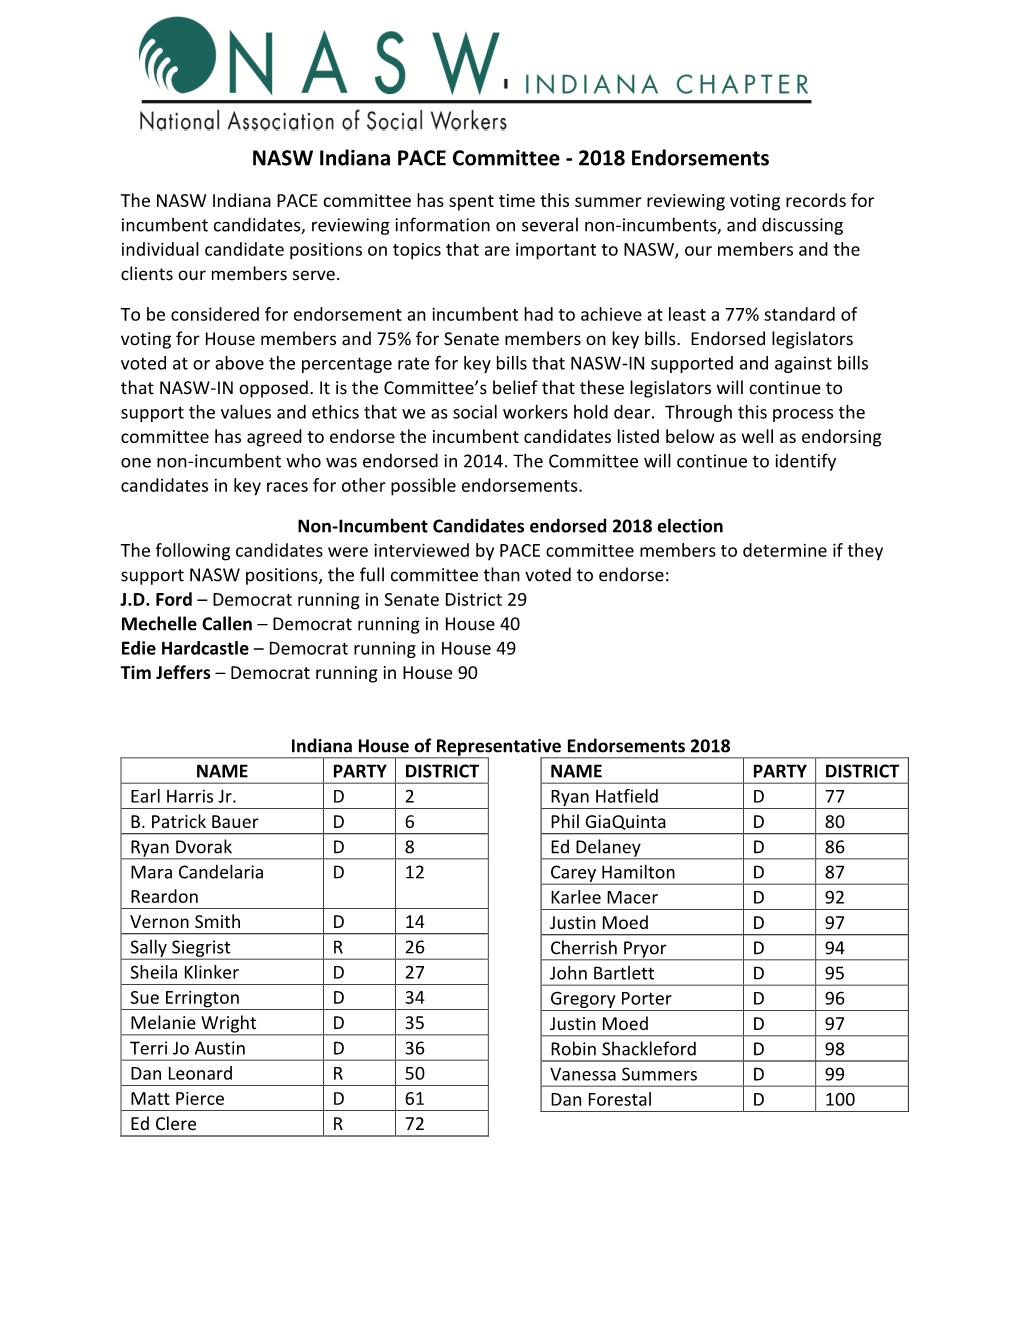 NASW Indiana PACE Committee - 2018 Endorsements